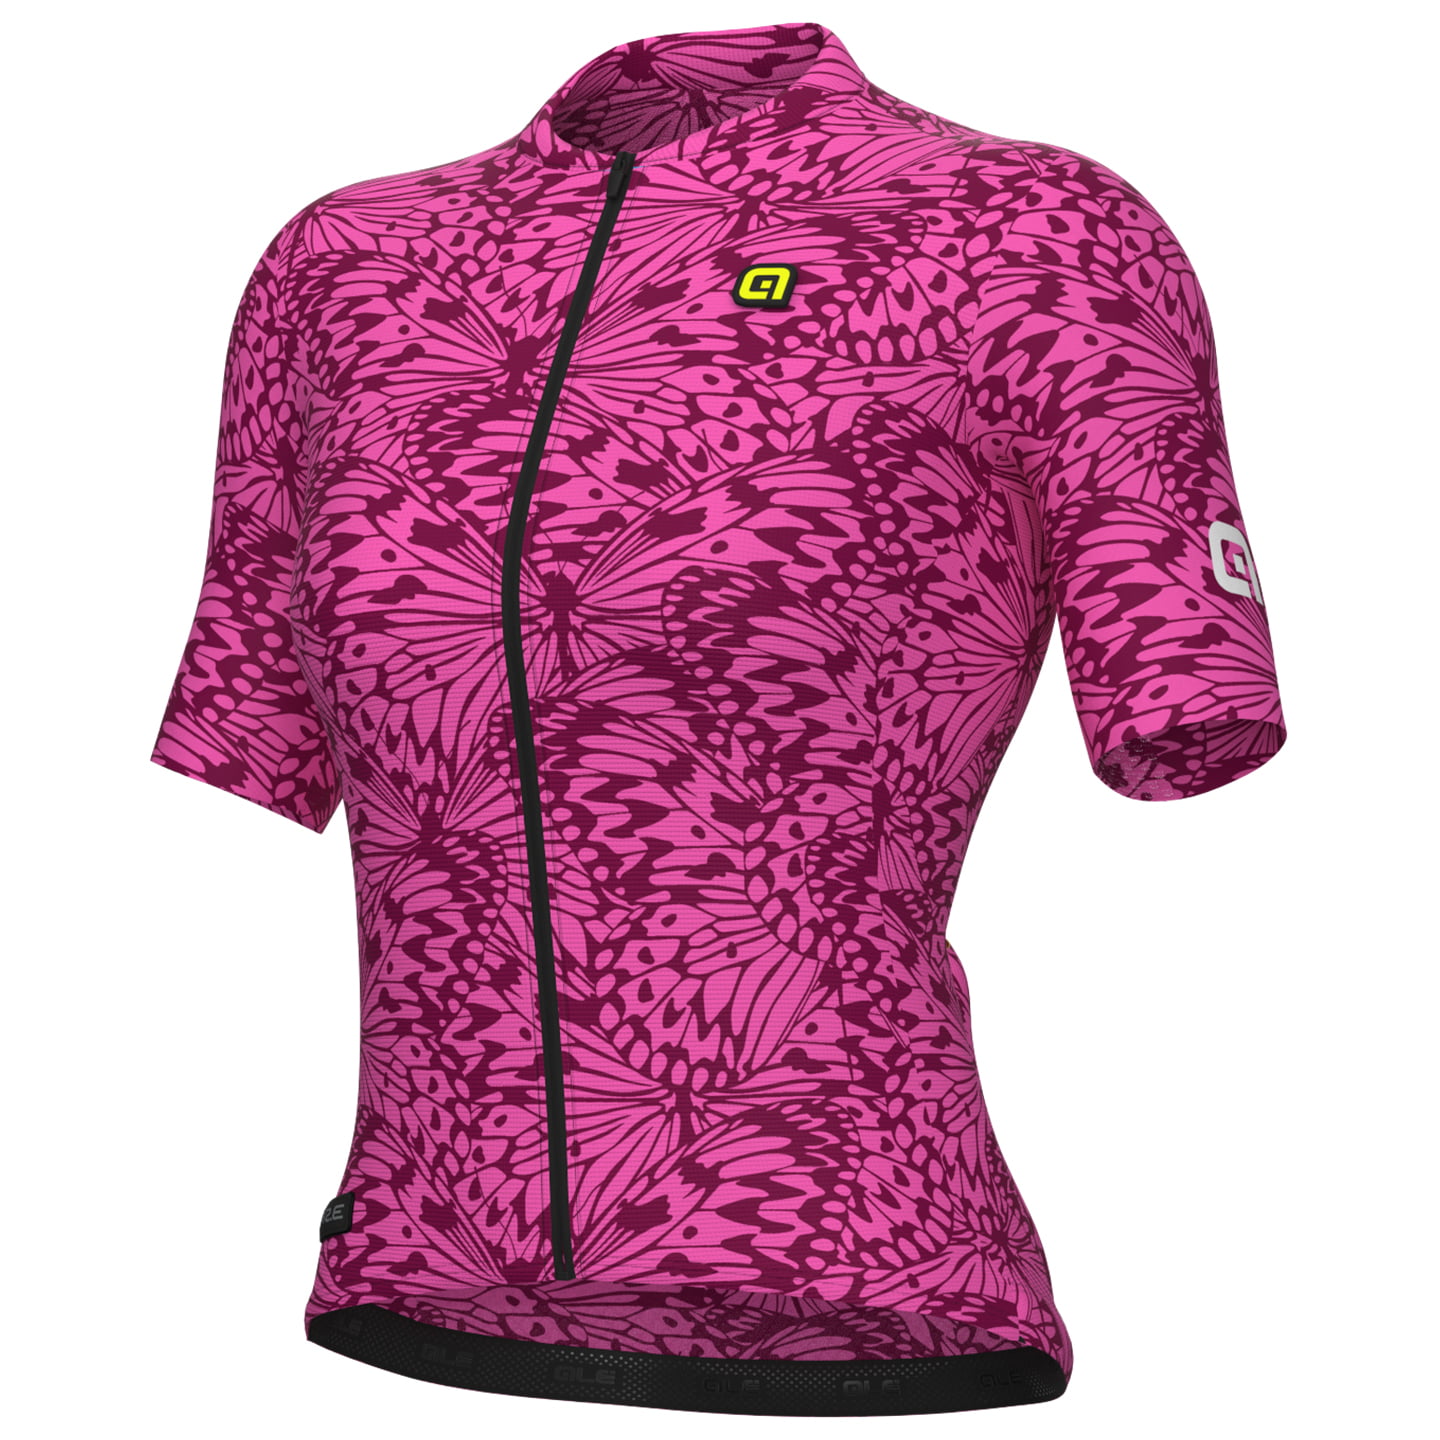 ALE Papillon Women’s Jersey Women’s Short Sleeve Jersey, size L, Cycling jersey, Cycling clothing